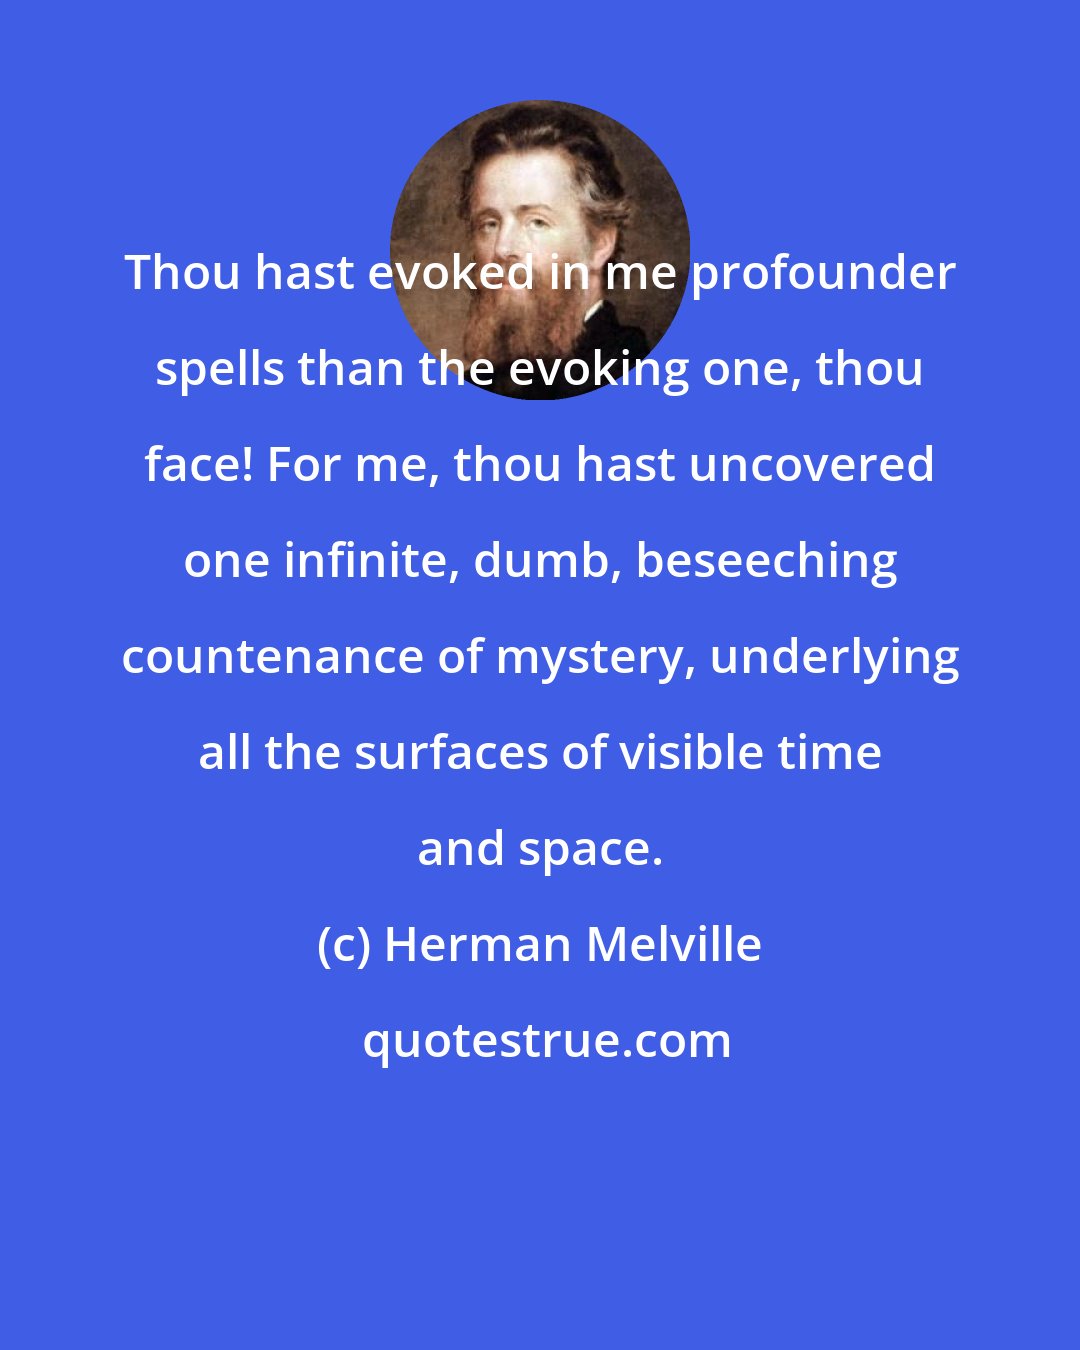 Herman Melville: Thou hast evoked in me profounder spells than the evoking one, thou face! For me, thou hast uncovered one infinite, dumb, beseeching countenance of mystery, underlying all the surfaces of visible time and space.